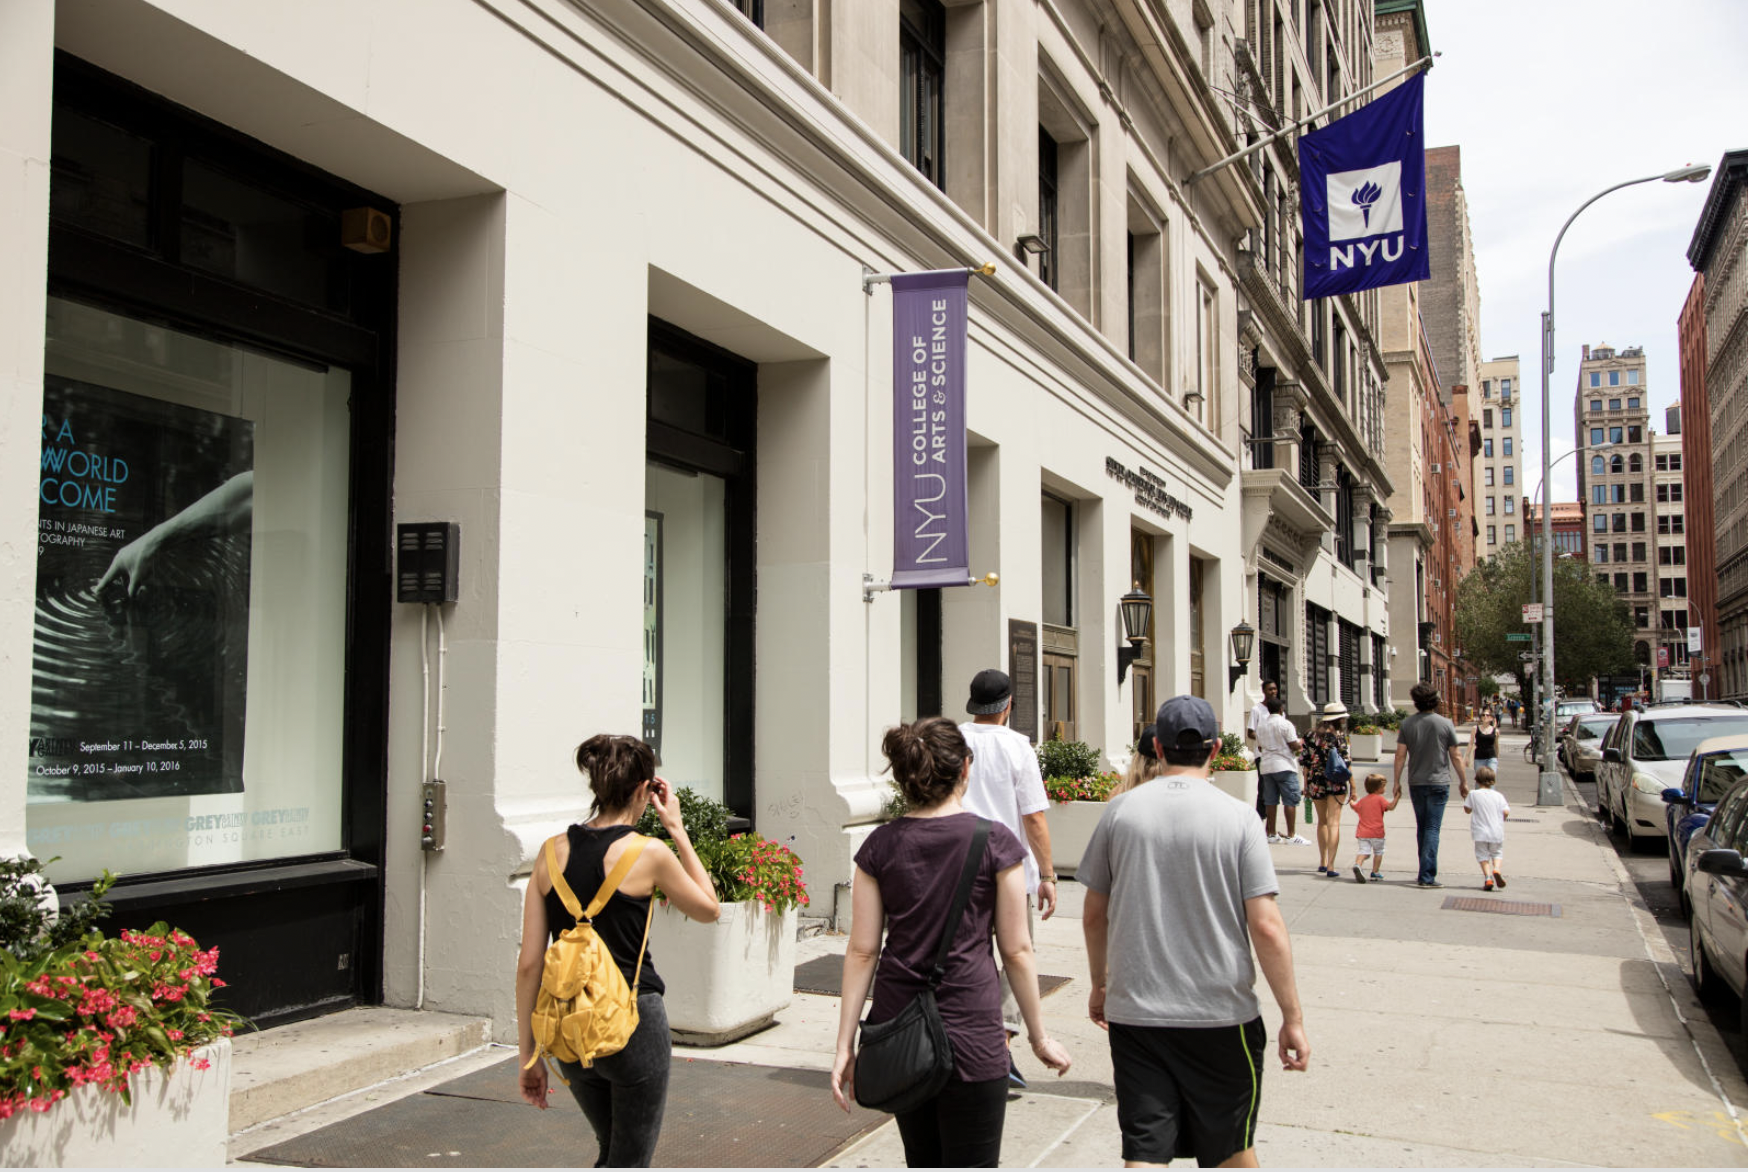 Students passing by the NYU College of Arts and Science building.